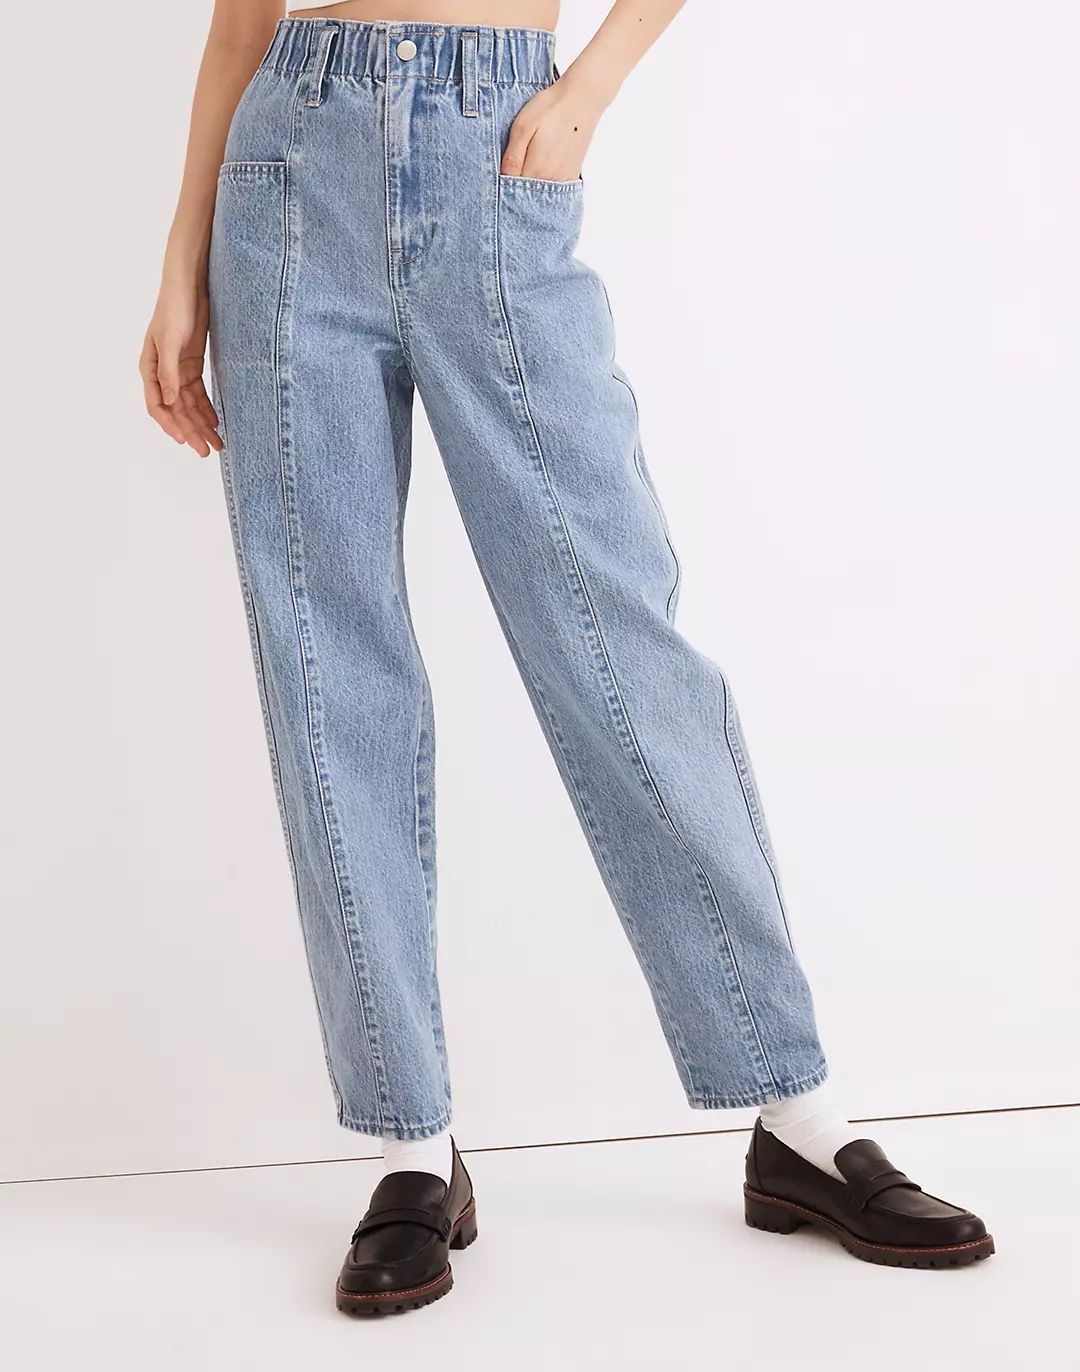 Pull-On Balloon Jeans in Closson Wash: Paperbag Edition | Madewell